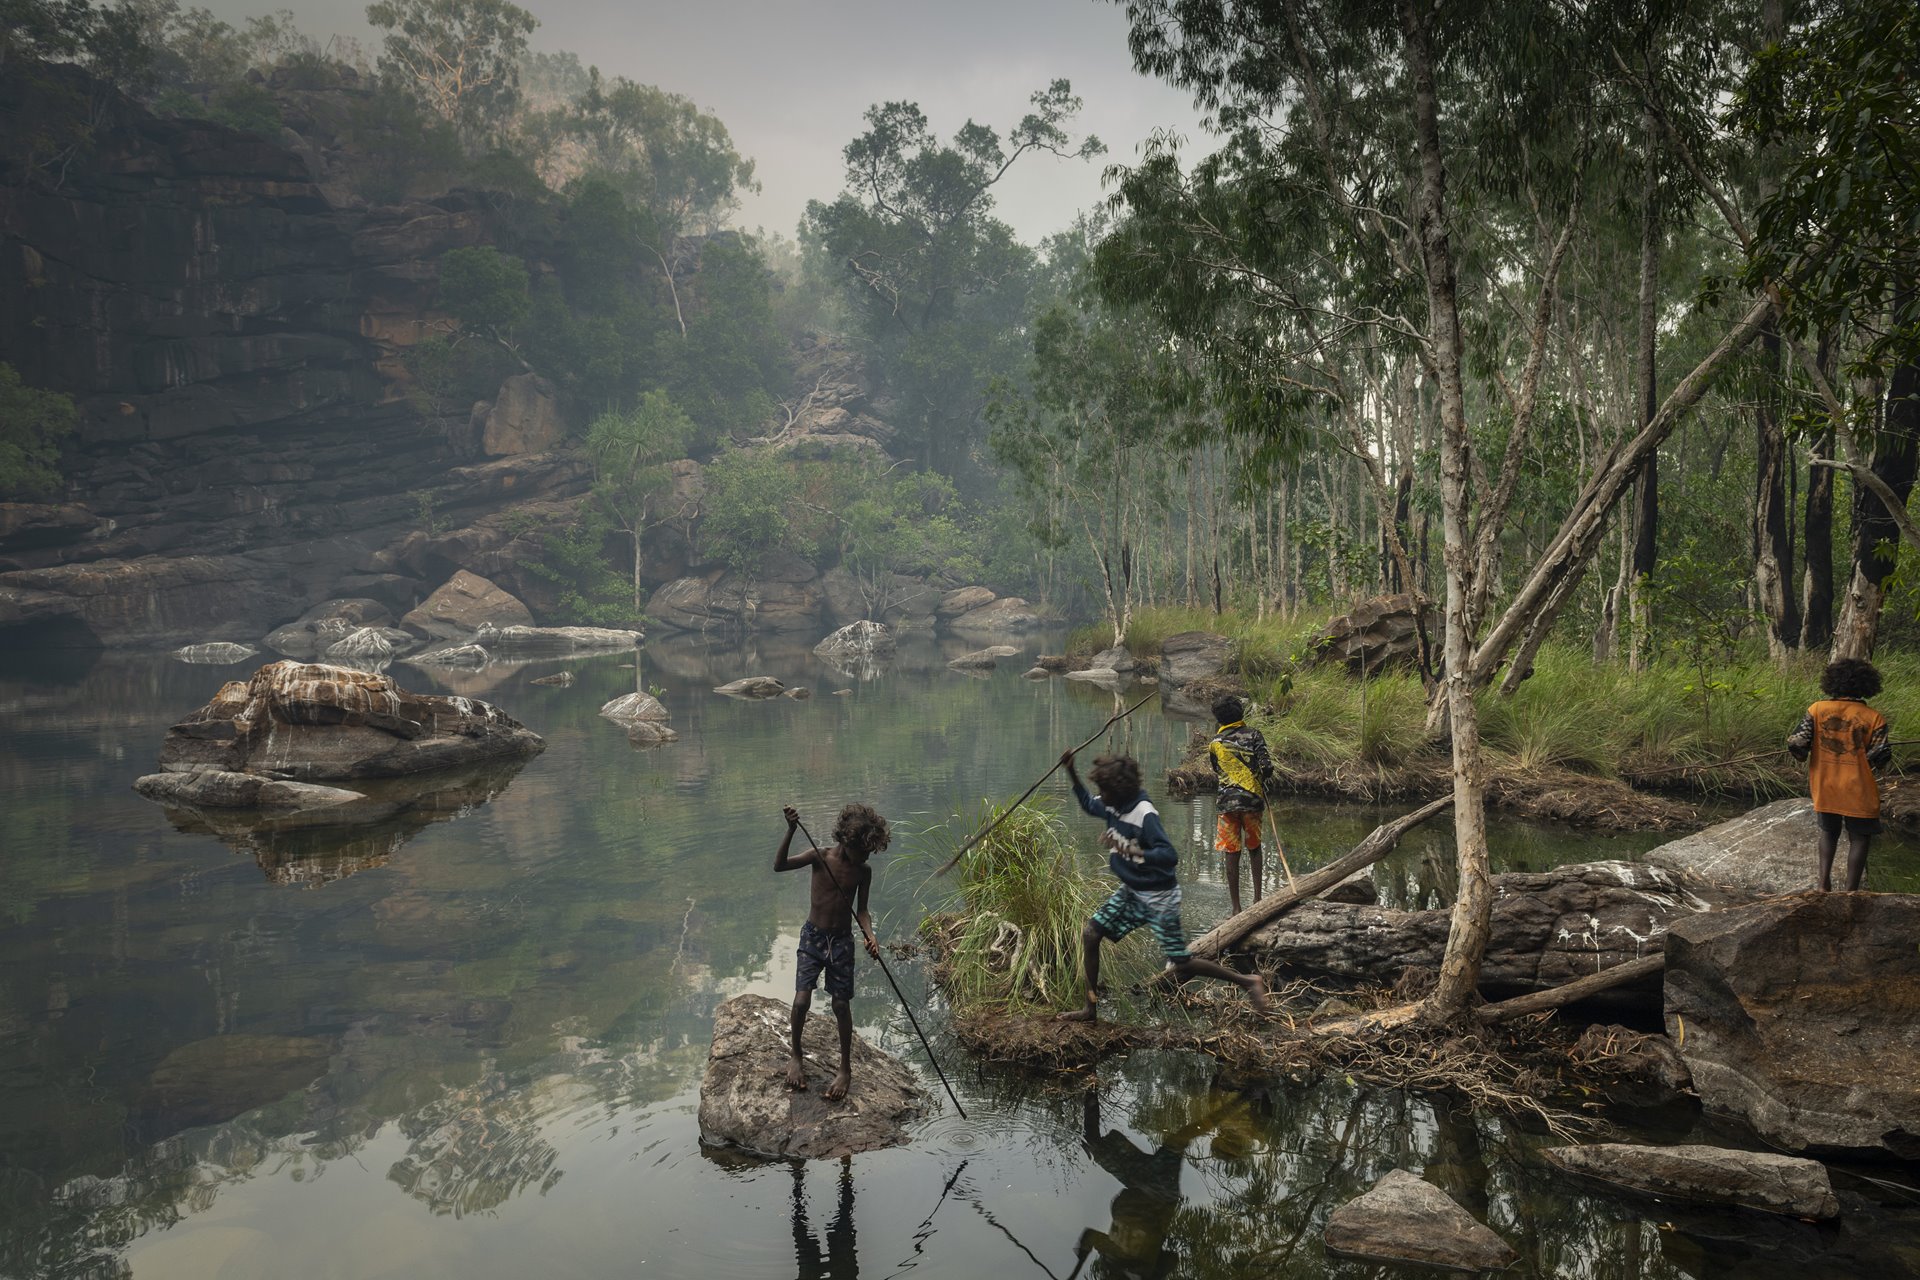 <p>A group of children spear fish early one morning near Djulkar Waterfall, Arnhem Land, Australia, on 23 July 2021. Smoke from a fire that was lit the previous day still hangs in the air.</p>
